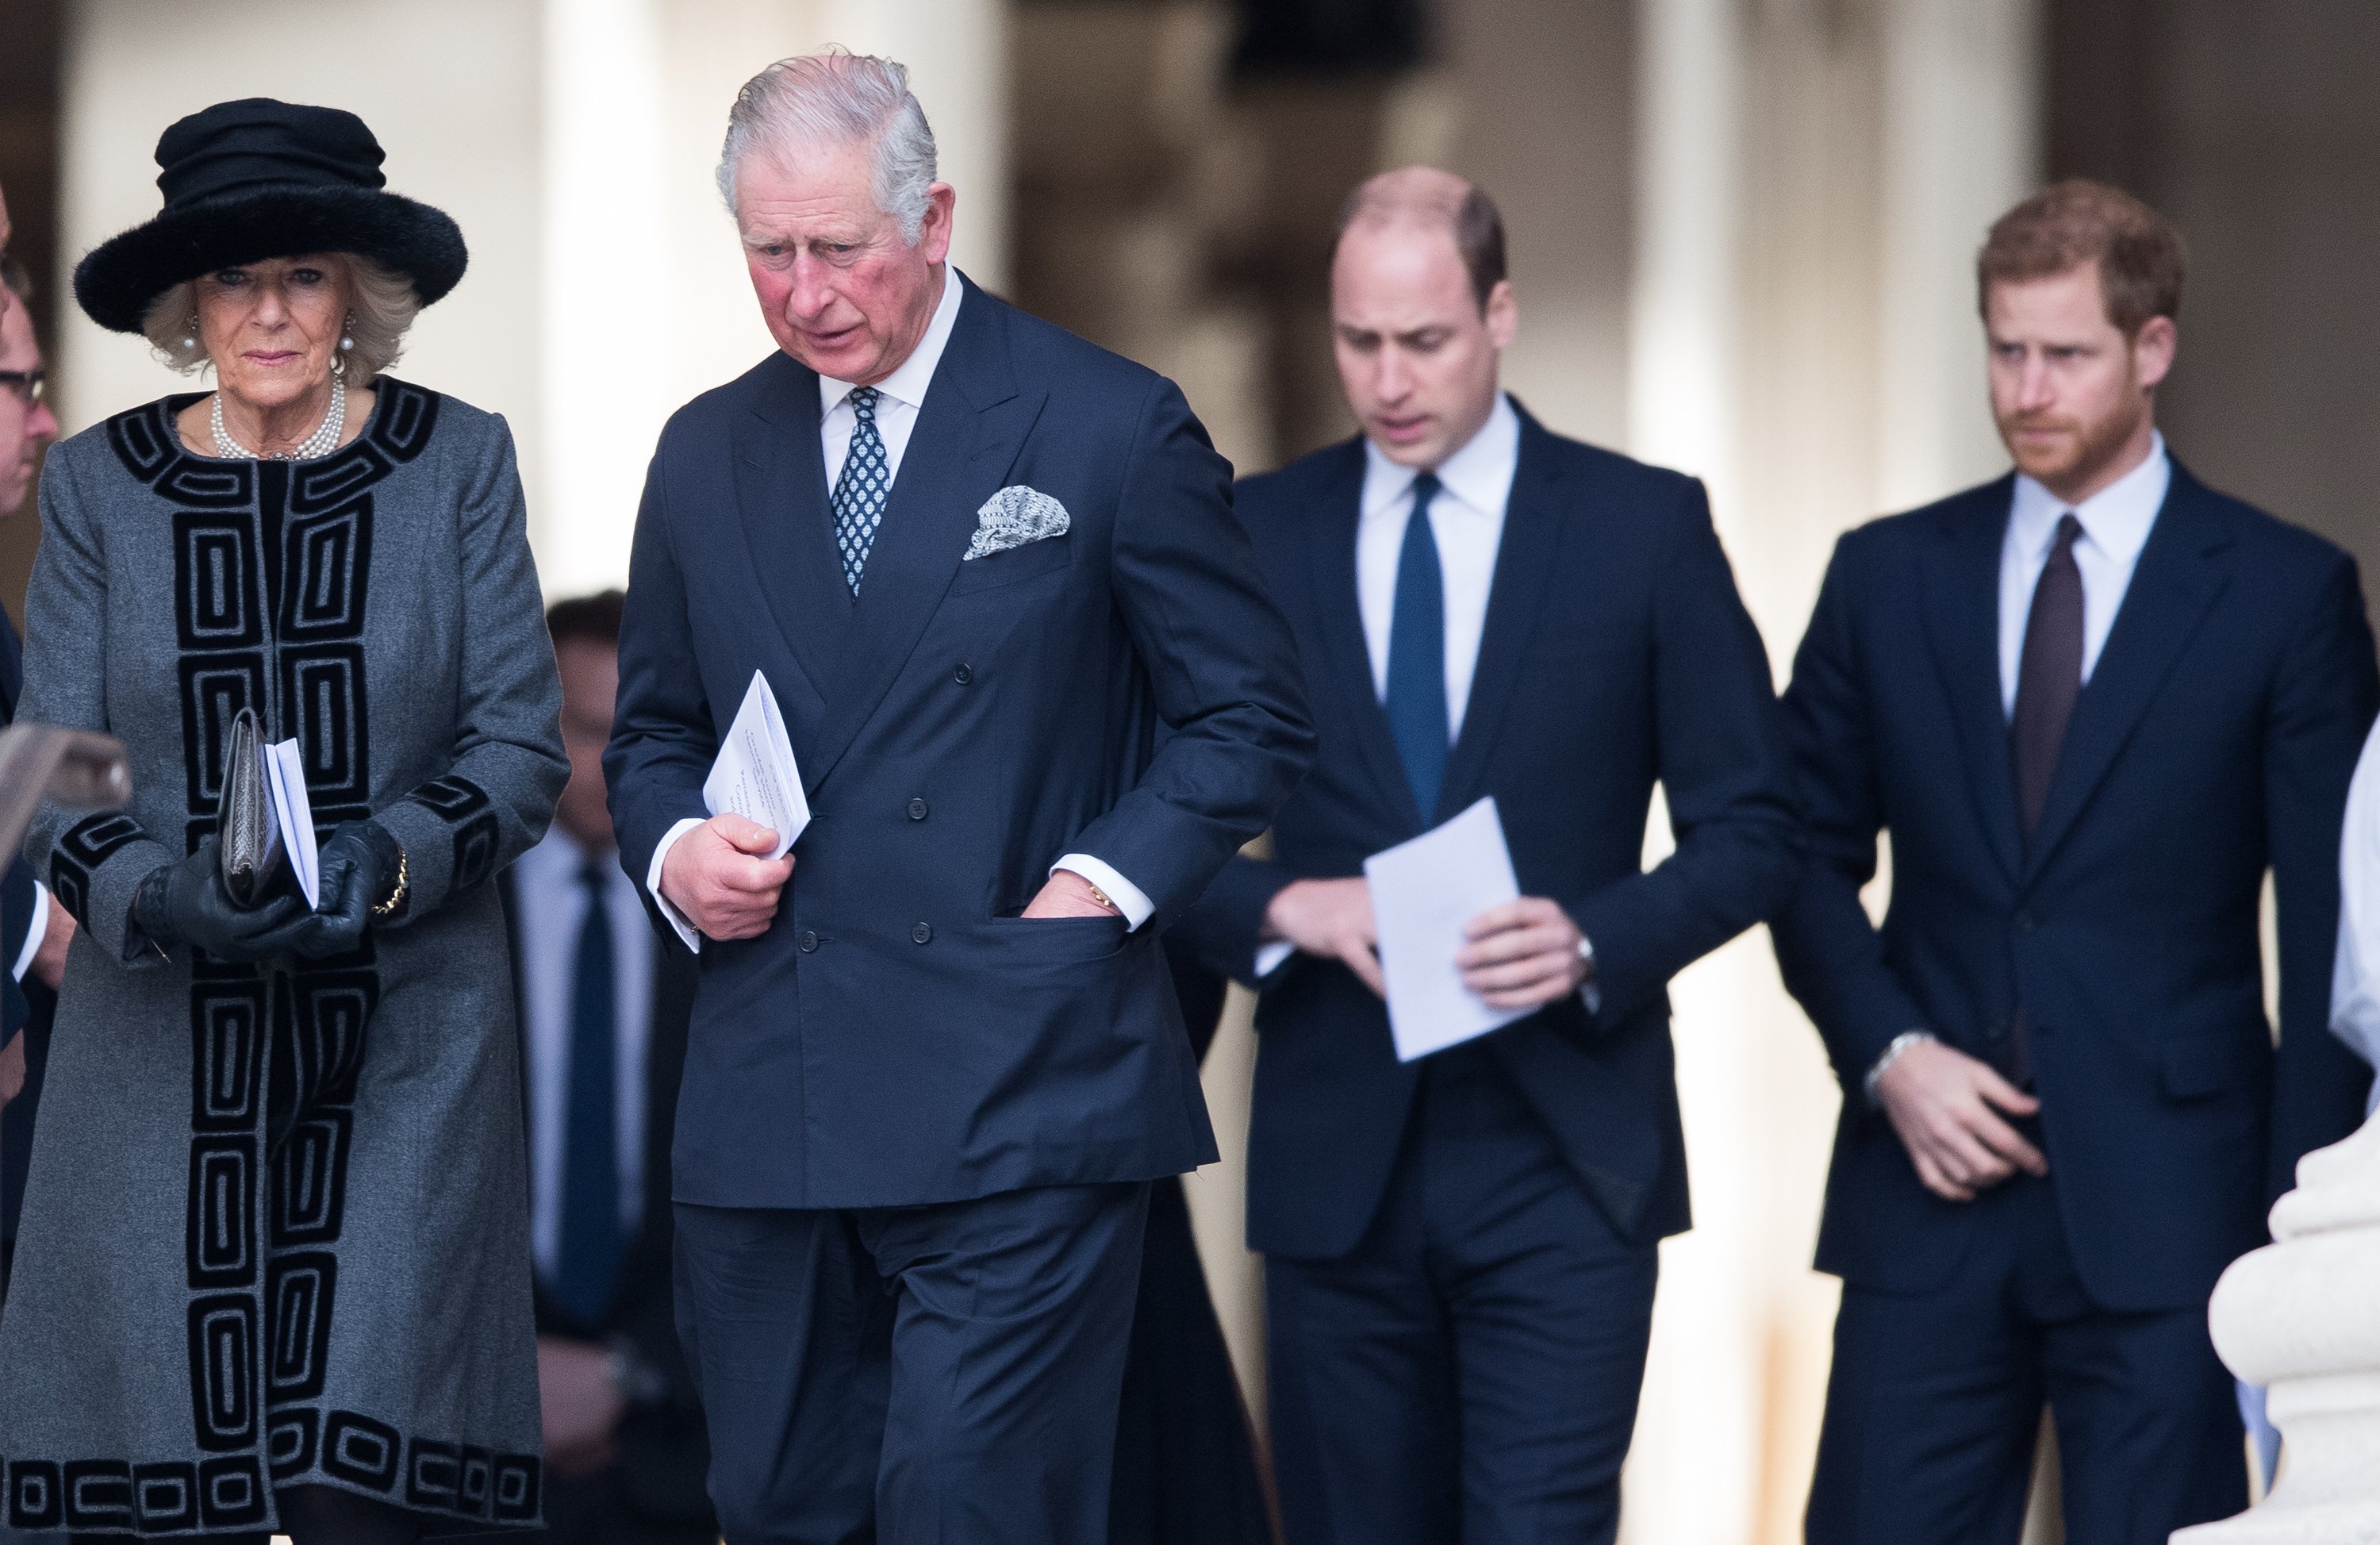 King Charles III, Queen Consort Camilla, Prince William and Prince Harry in London 2017. | Source: Getty Images